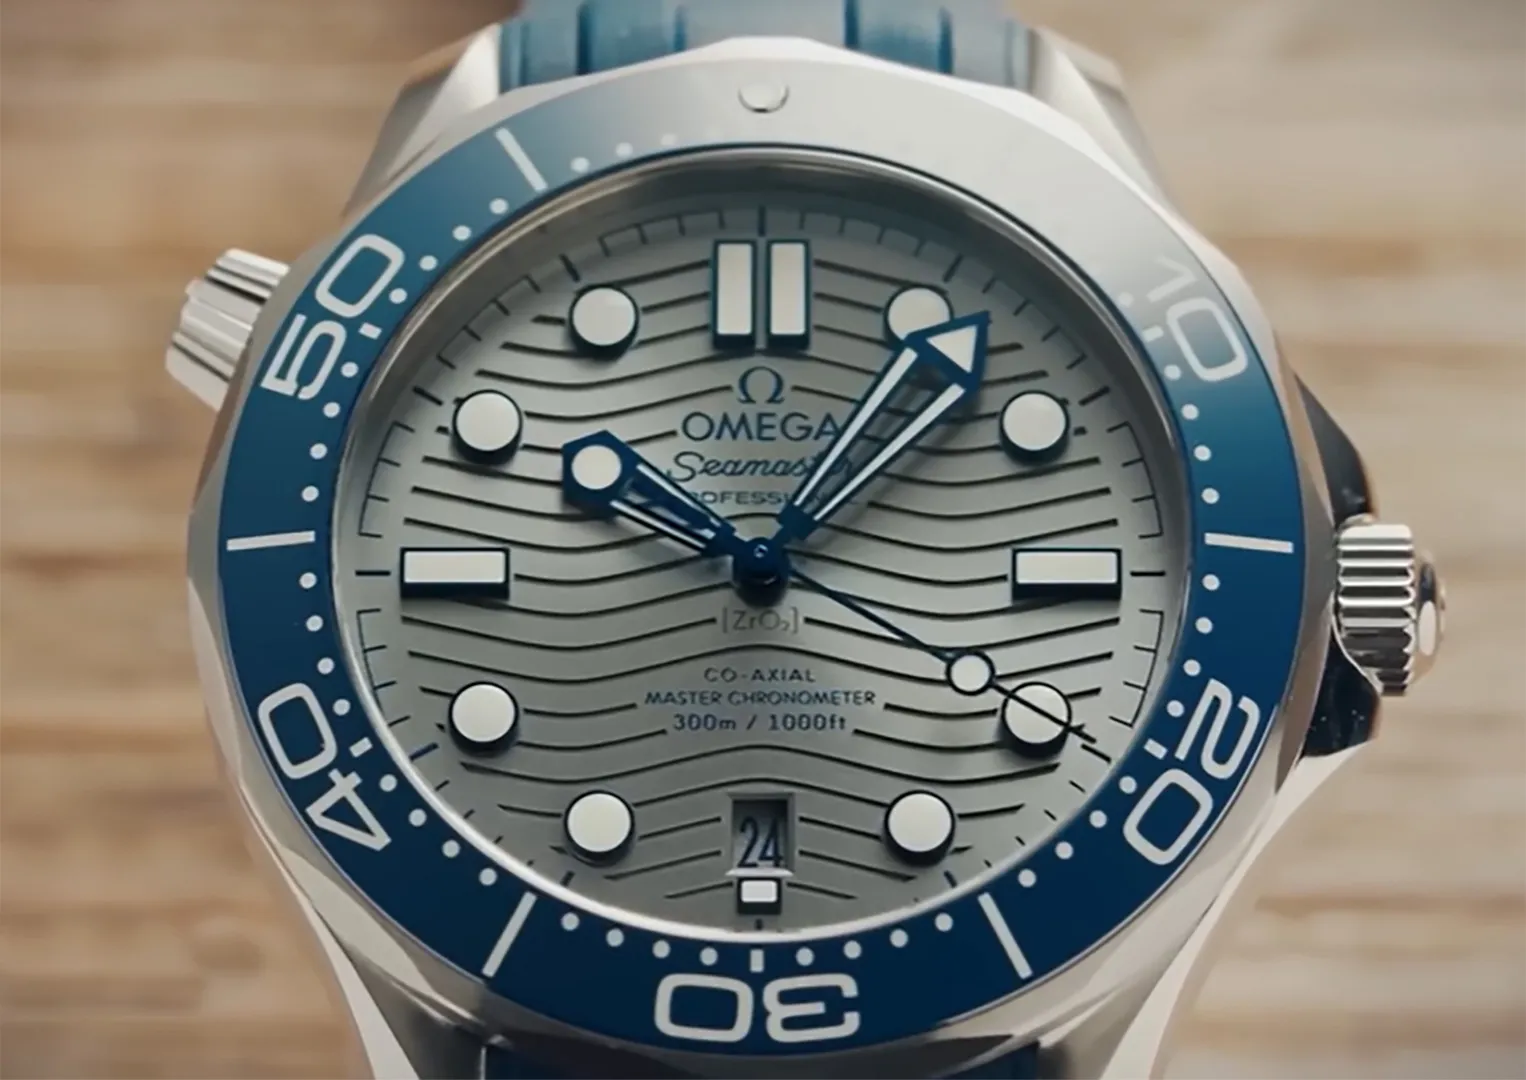 Reasons The UK Perfect Replica Omega Seamaster Will Never Be Top Dog